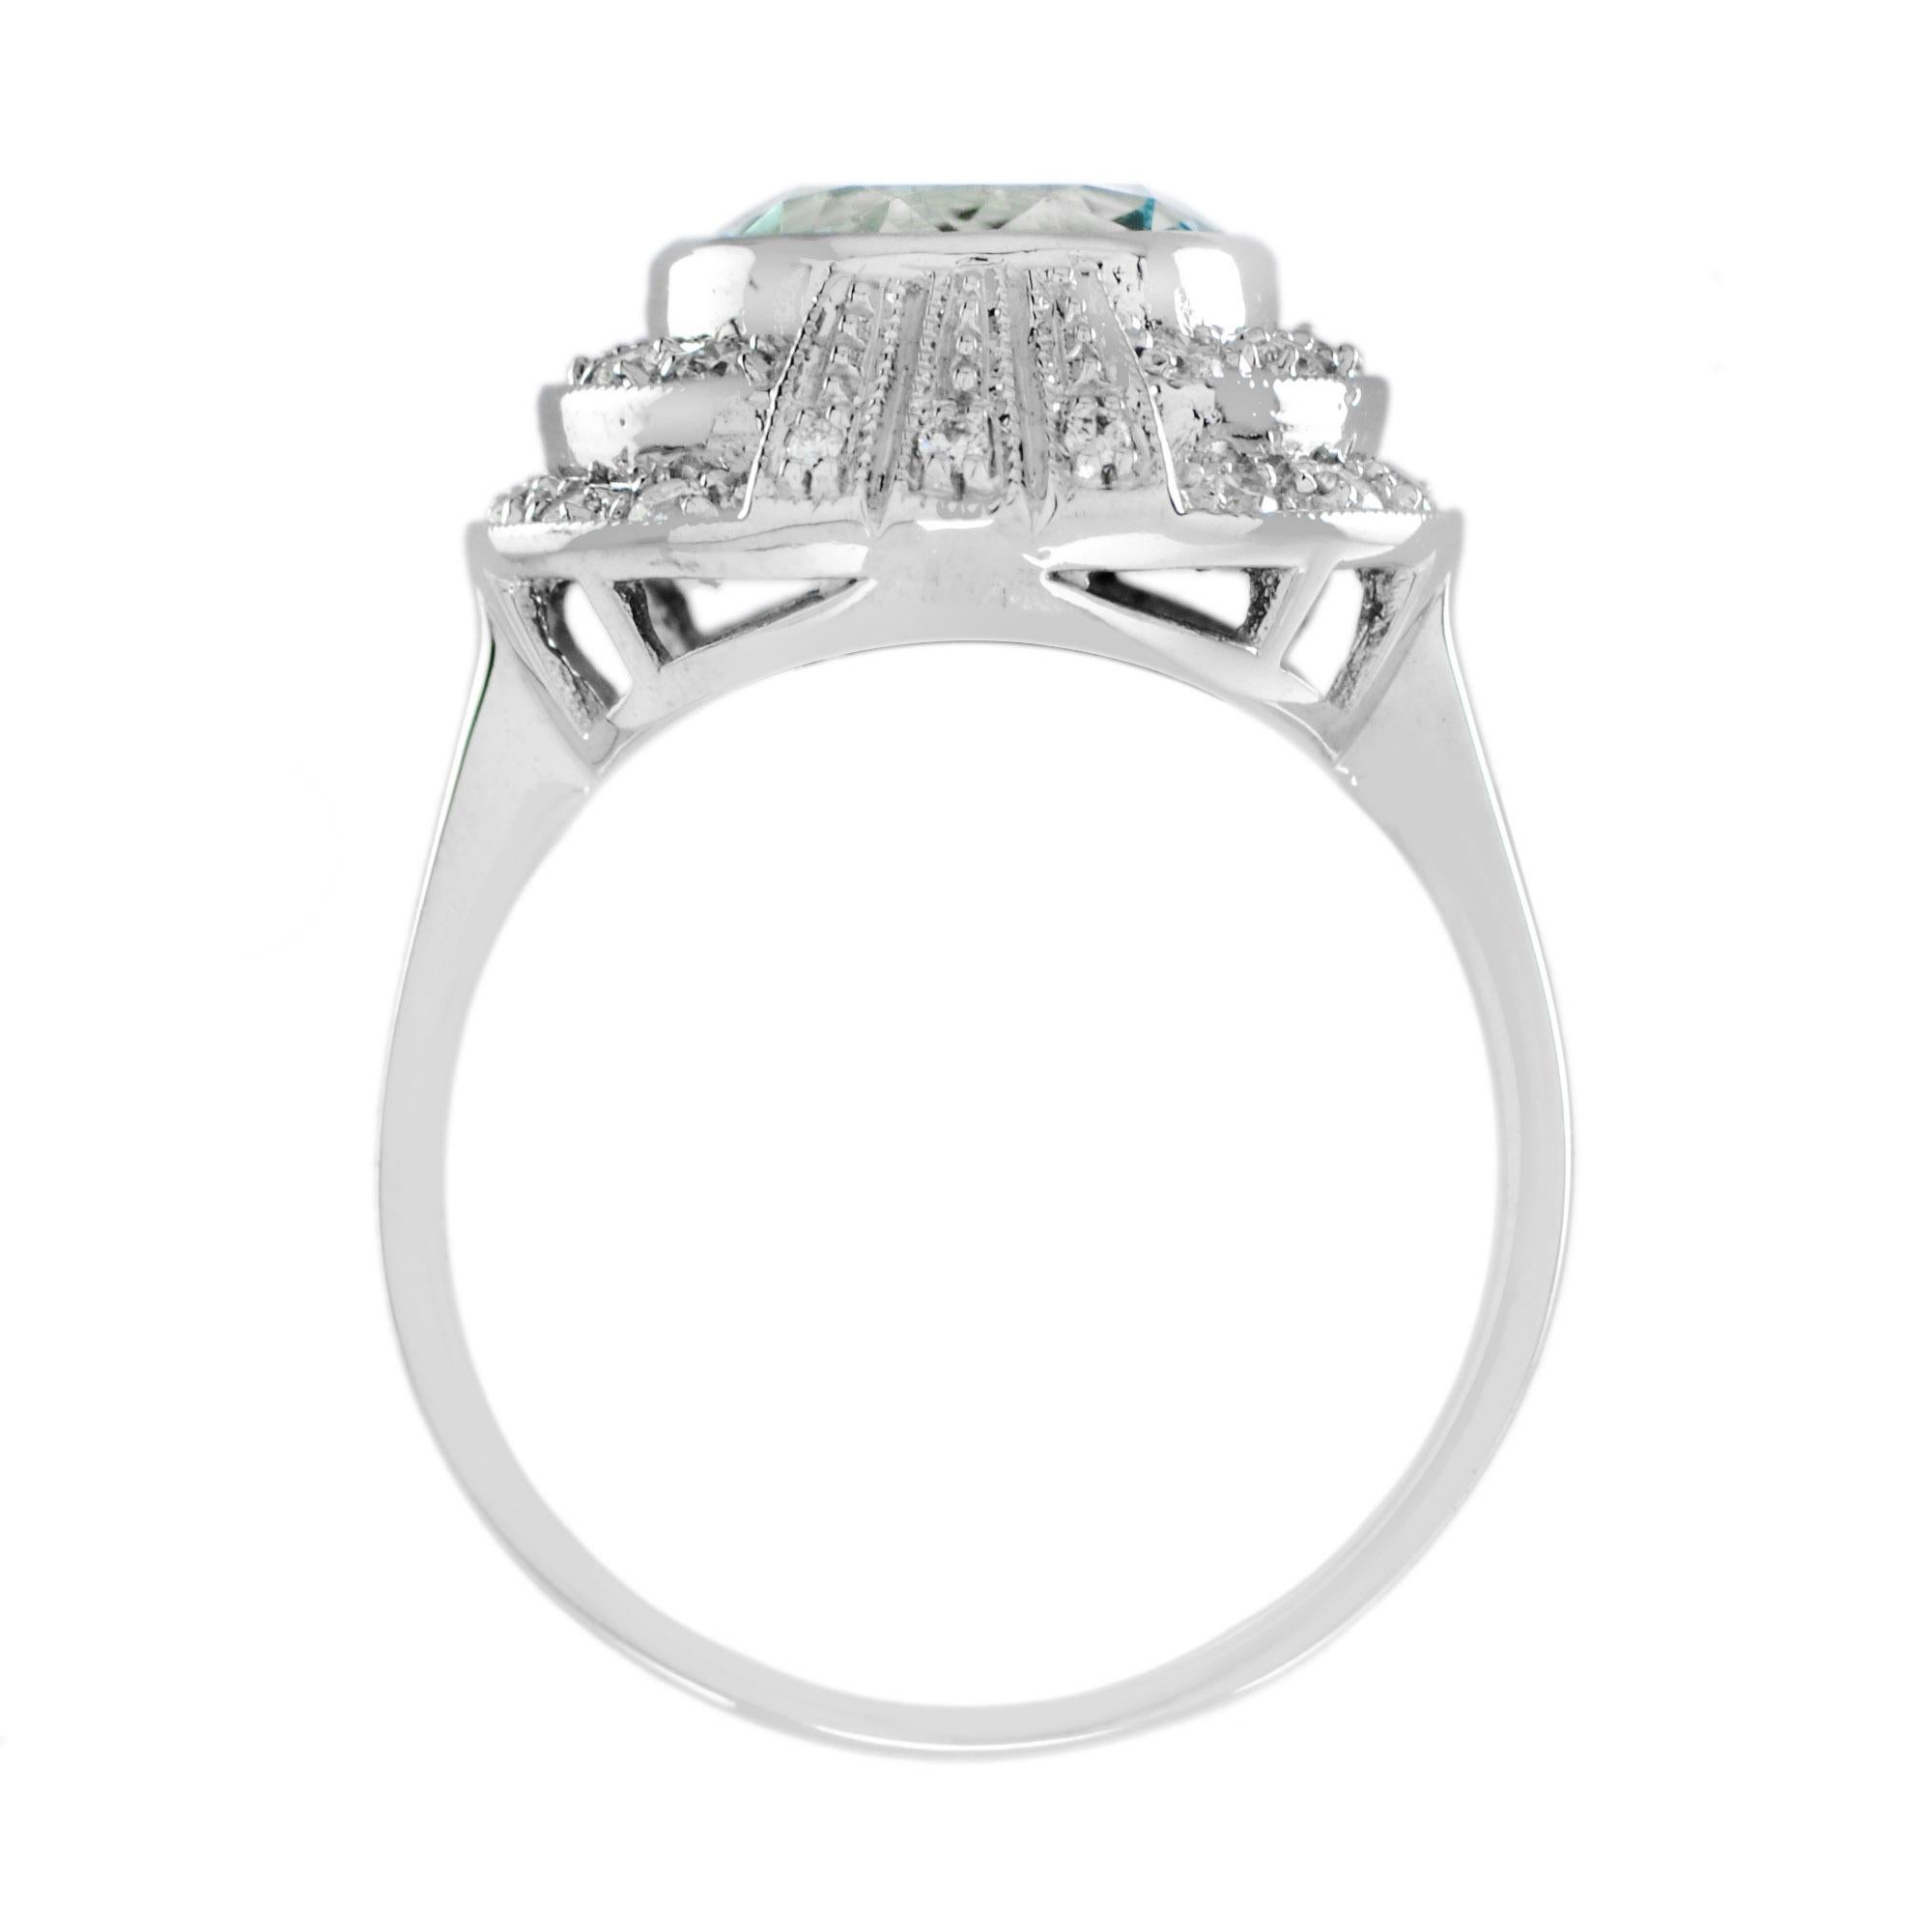 For Sale:  Extraordinary 2.2 Carats Aquamarine and Diamond Halo Ring in 18K White Gold 5